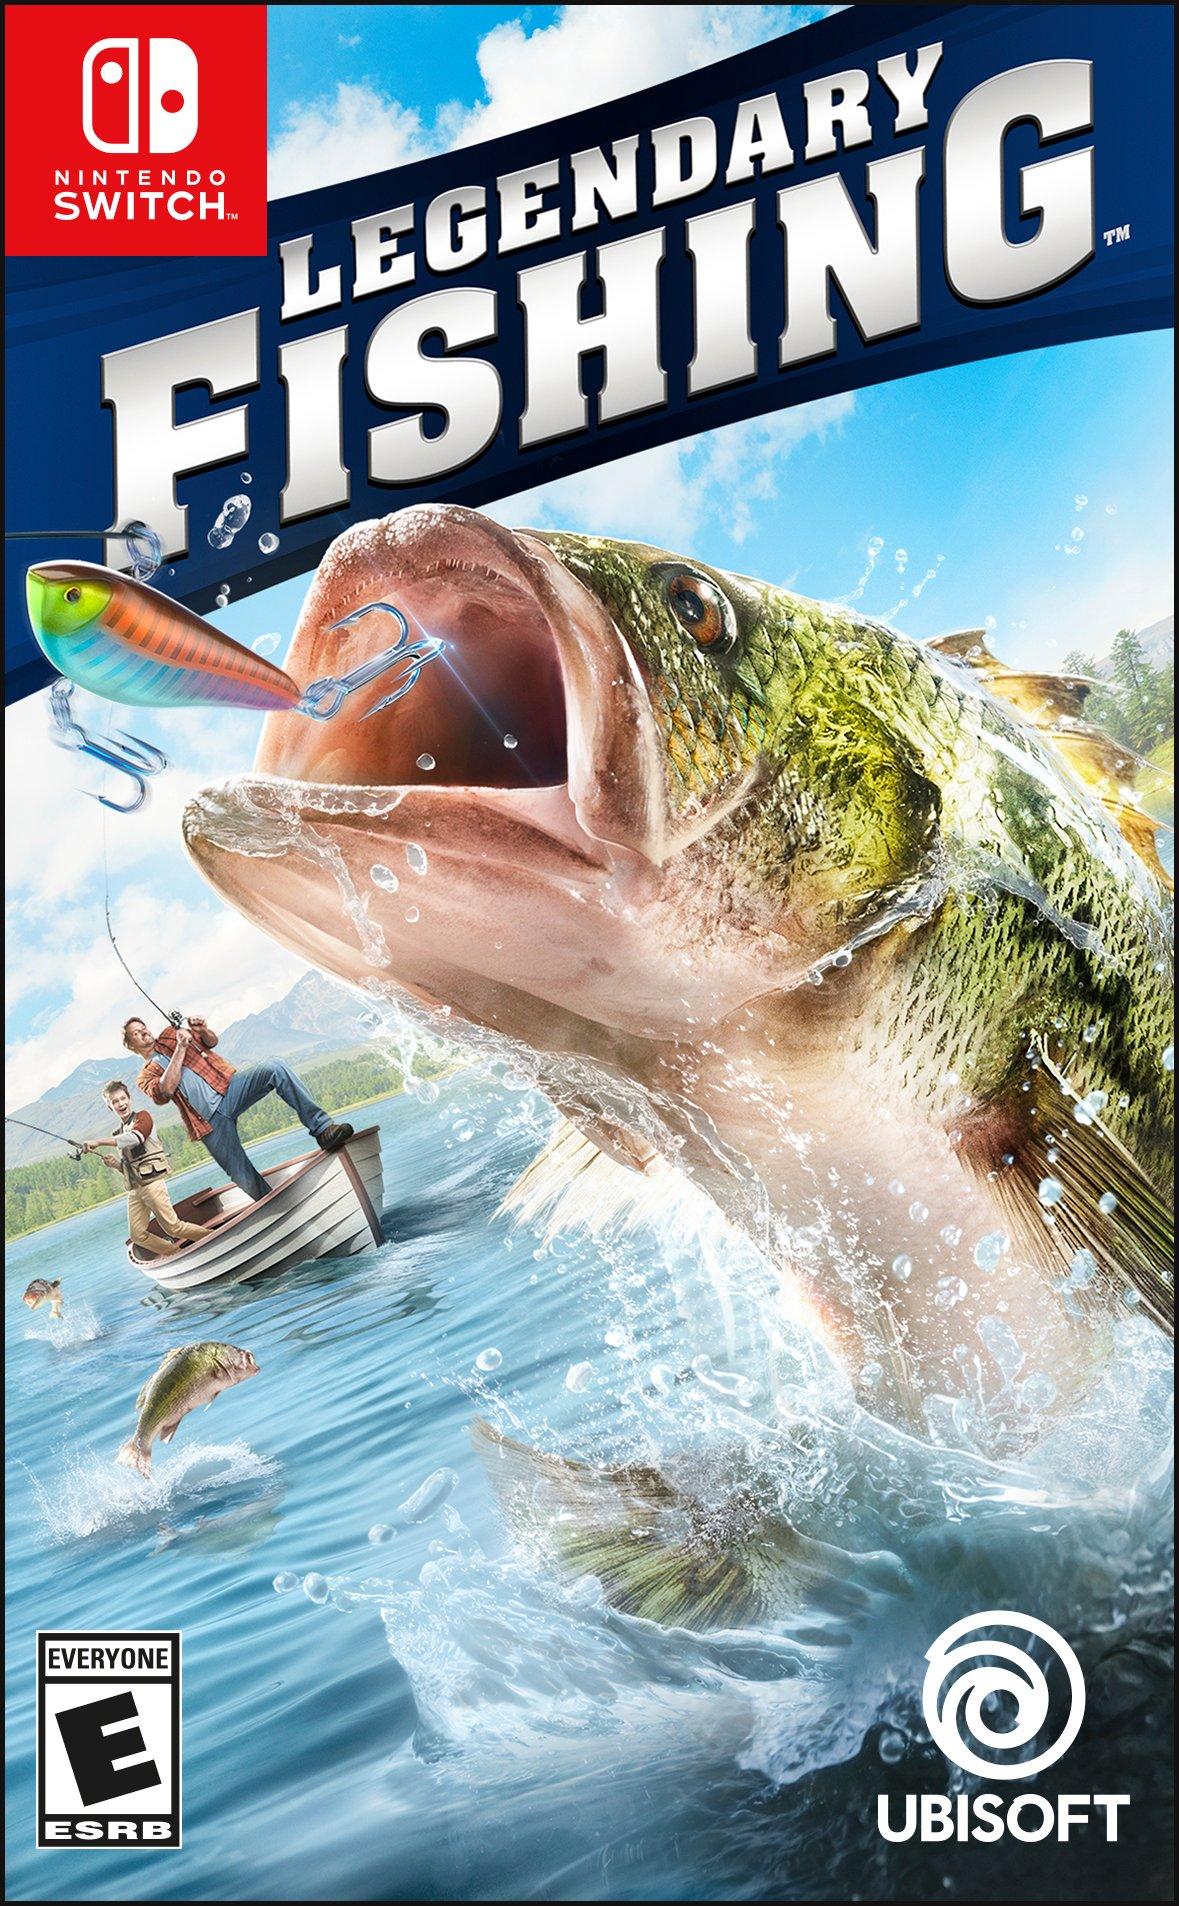 Legendary Fishing - Nintendo Switch, Pre-Owned